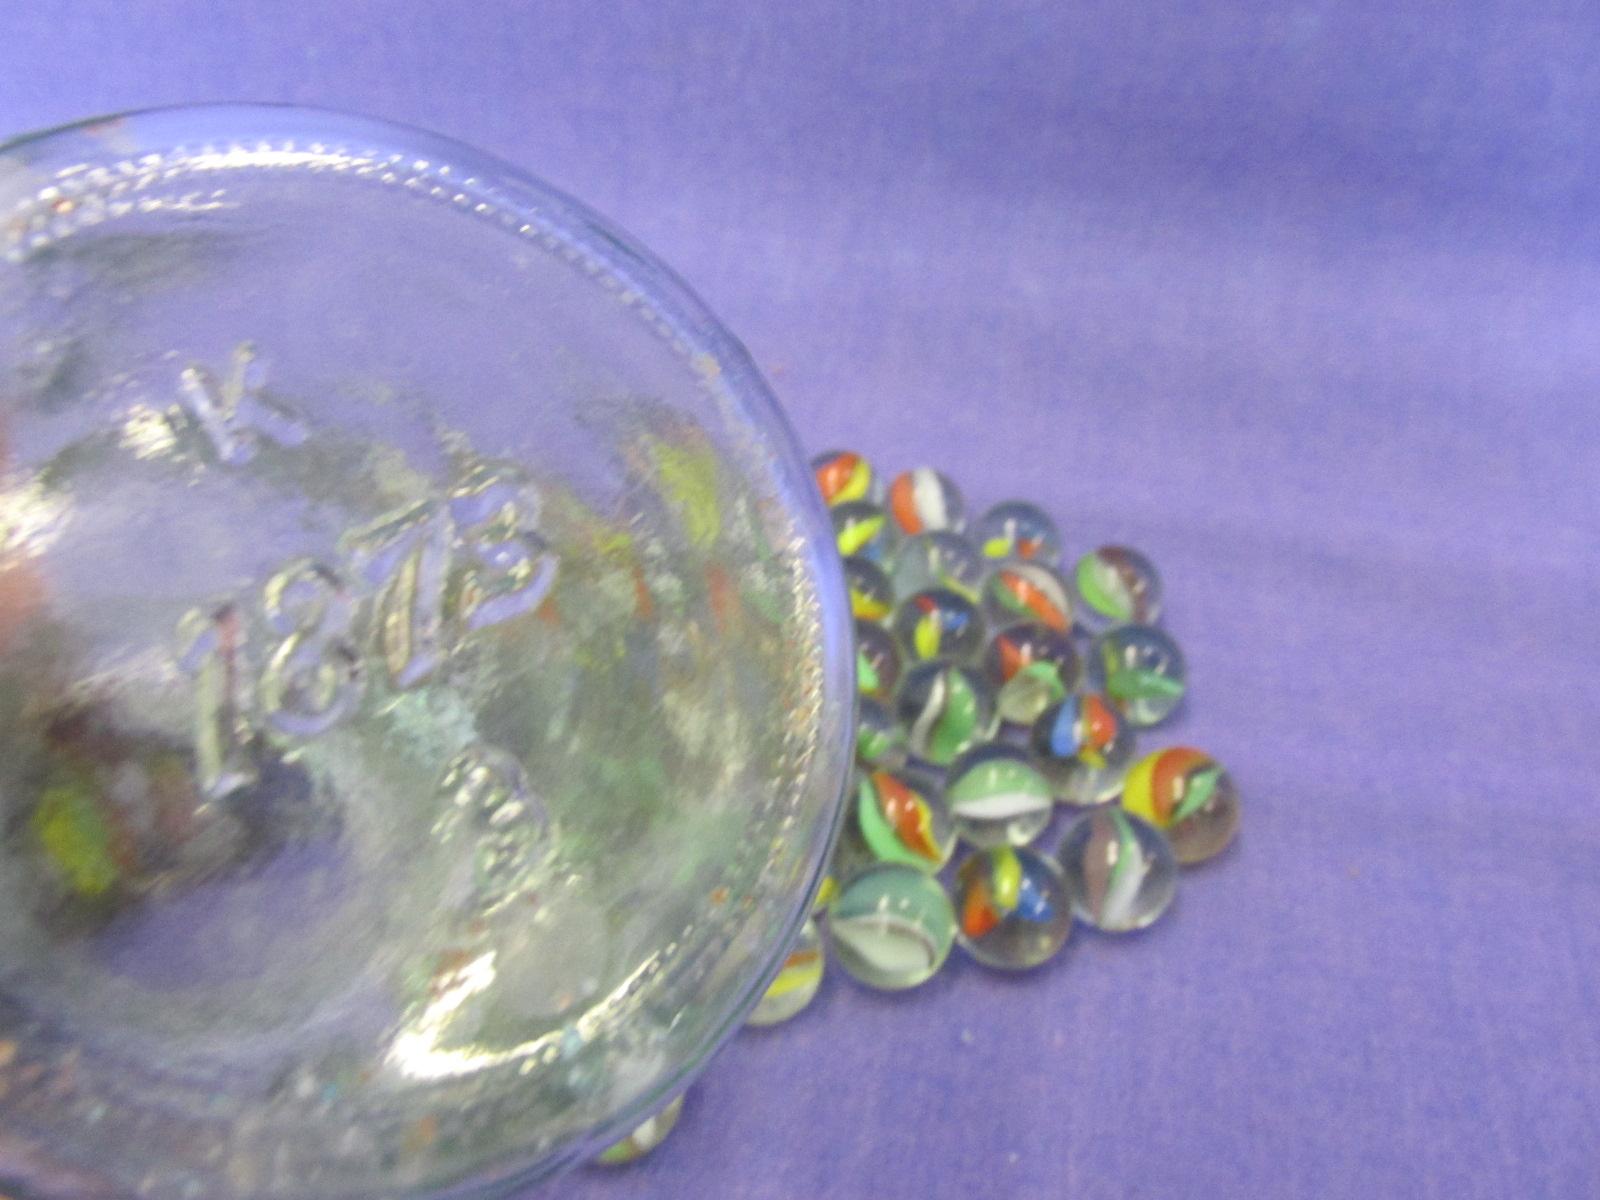 60 Glass Marbles in Glass Jar with Metal Bale – Jar is 5 1/4” tall